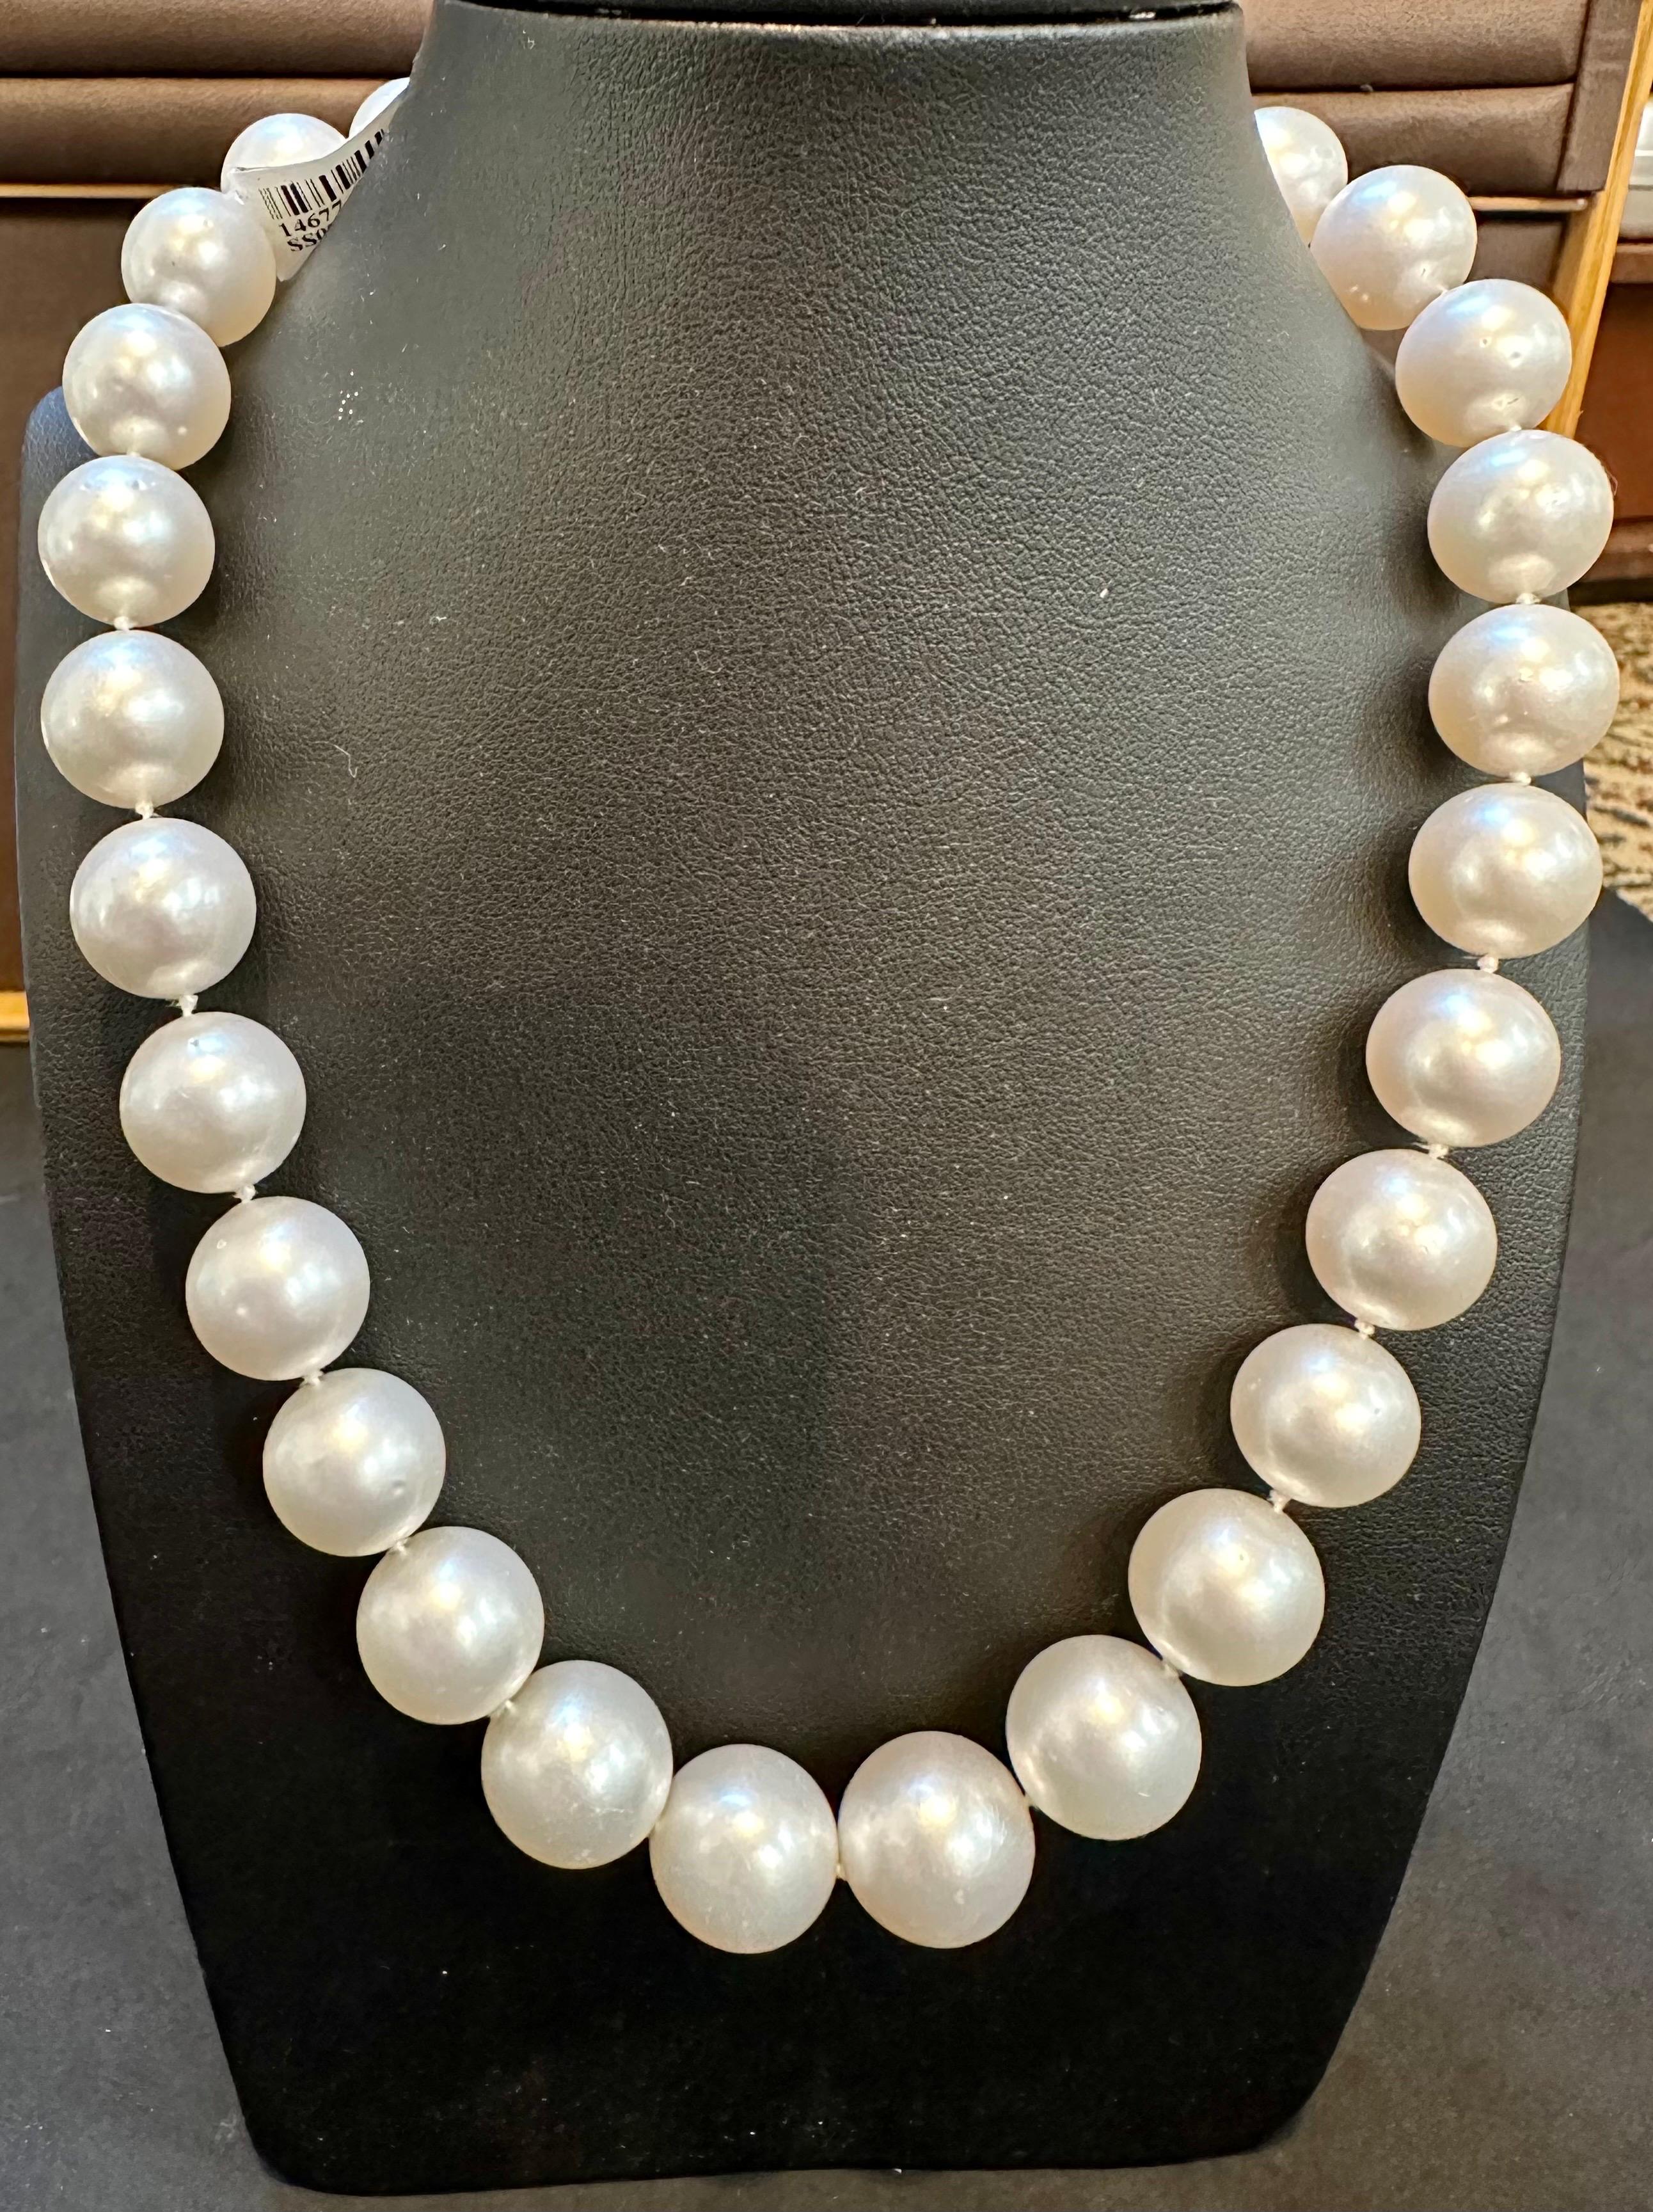 13-16.5mm White South Sea Round Pearl Necklace - AAA Quality, 29 Pieces +Diamond For Sale 2